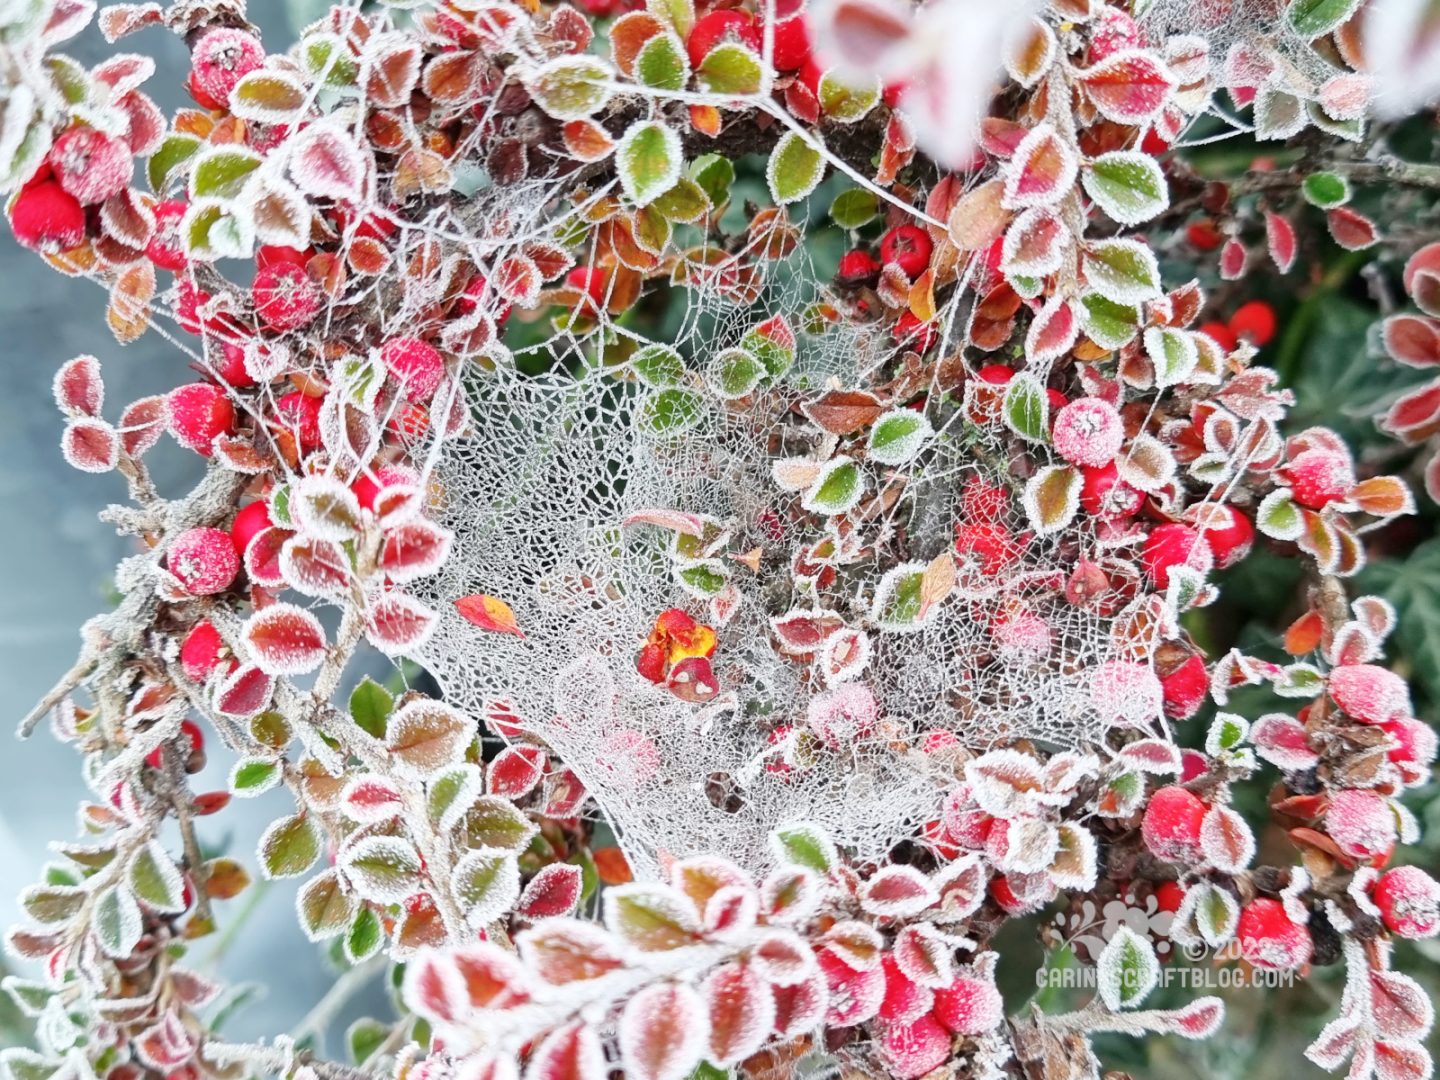 Tiny red berries and leaves form a natural wreath around a finely detailed frosty covered spiders web.